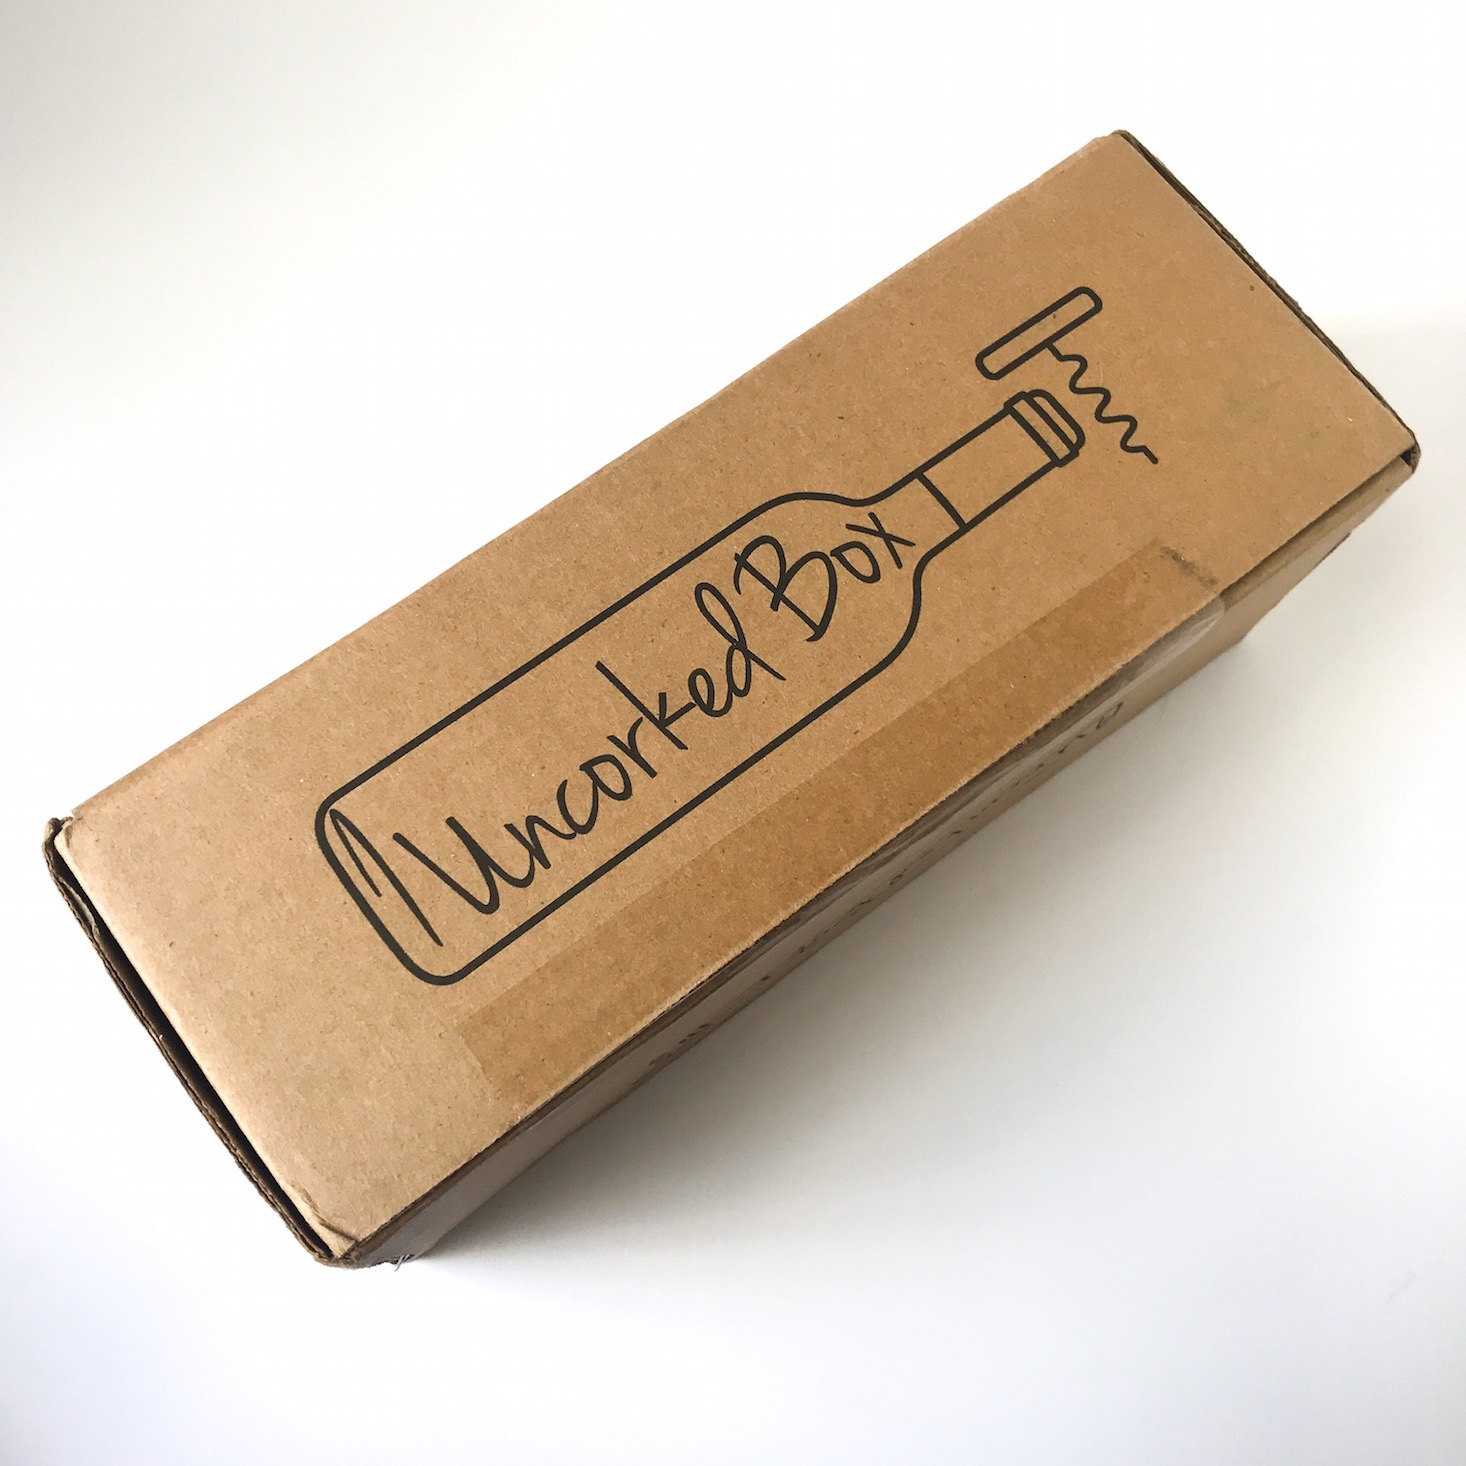 Uncorked Box Subscription Review + Coupon – August 2018